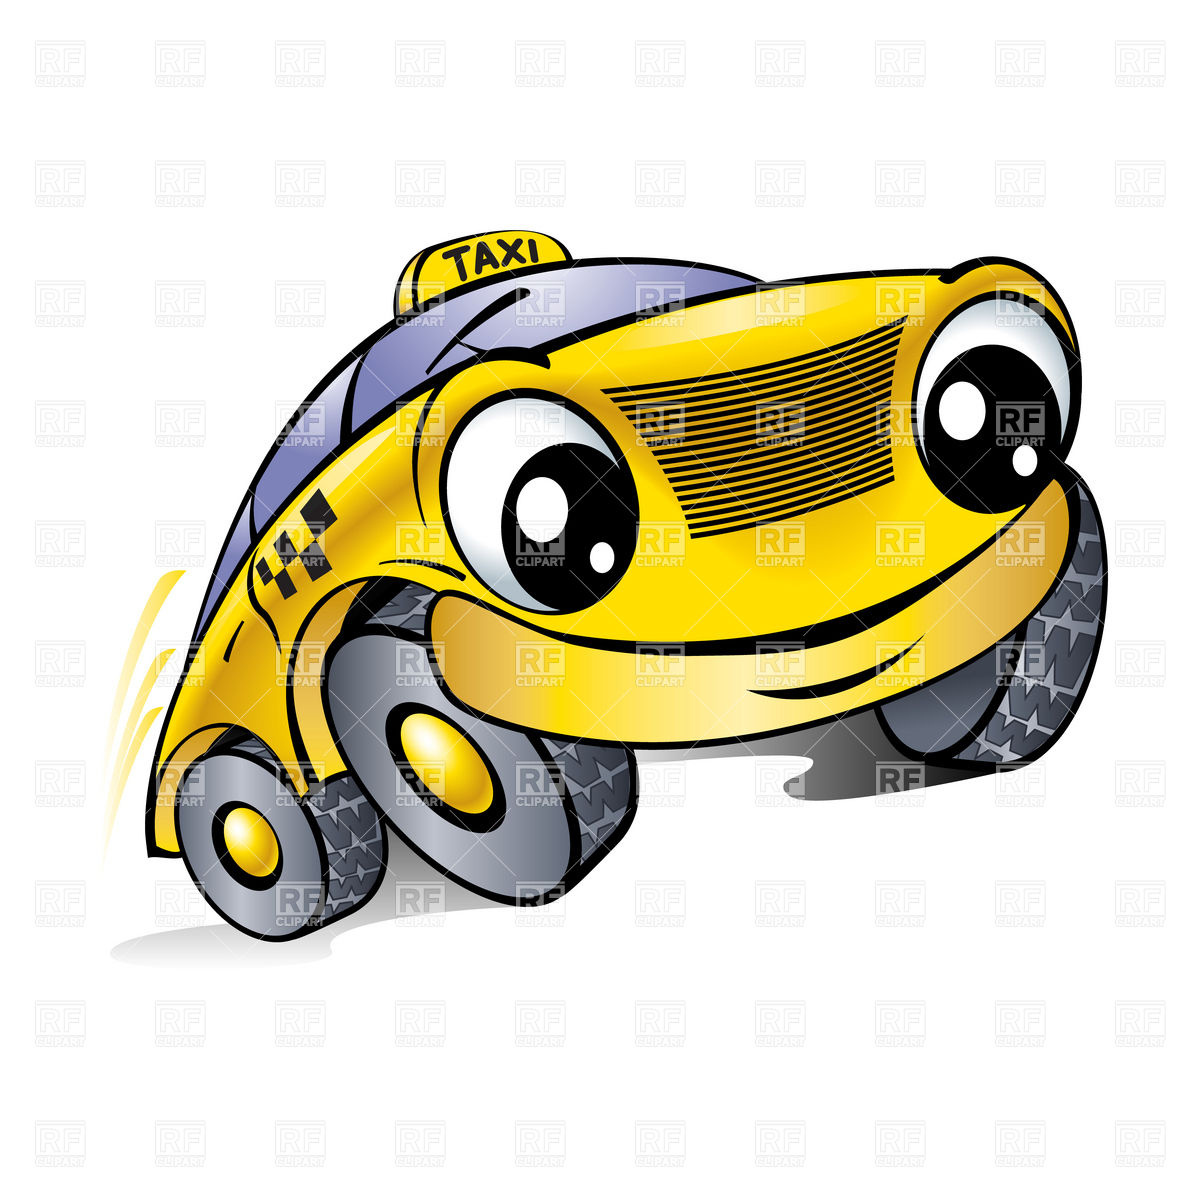 Taxi   Car With Smiling Face Download Royalty Free Vector Clipart